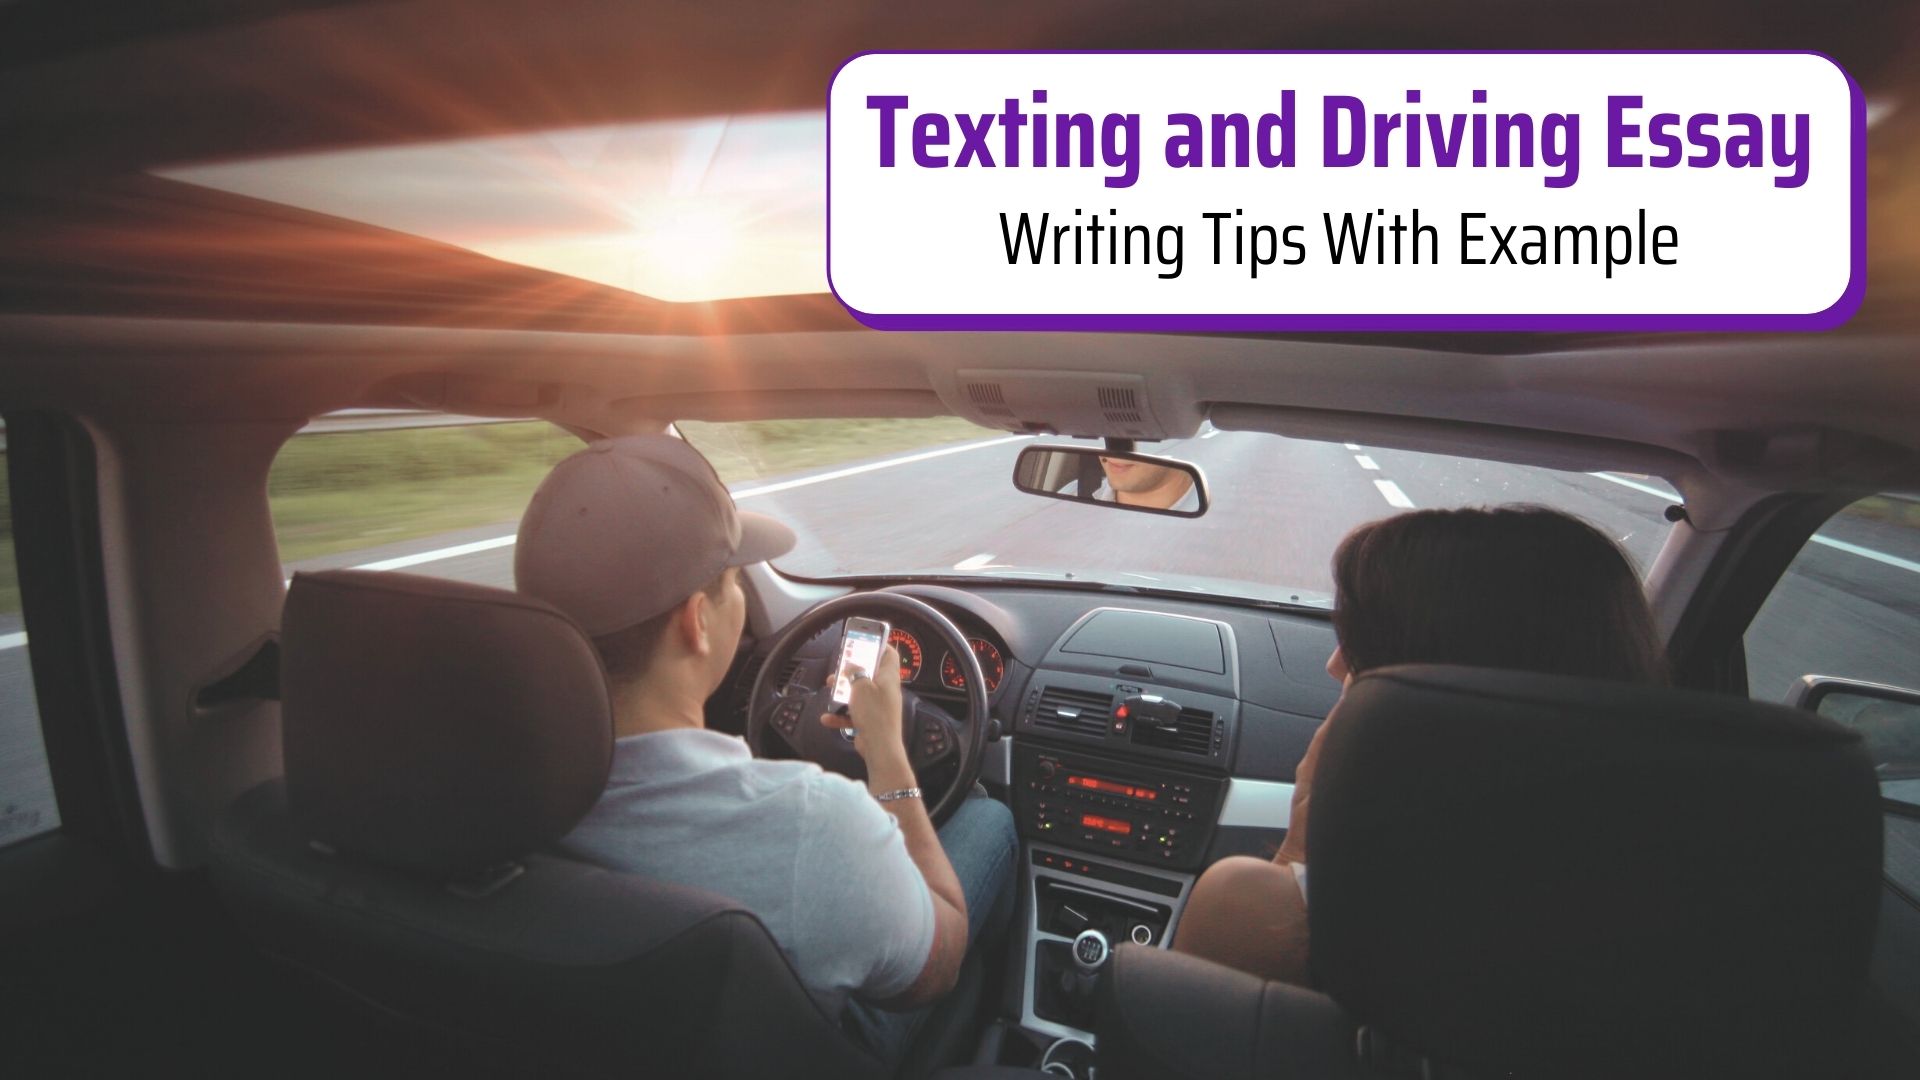 Texting and Driving Essay: Writing And Editing Tips